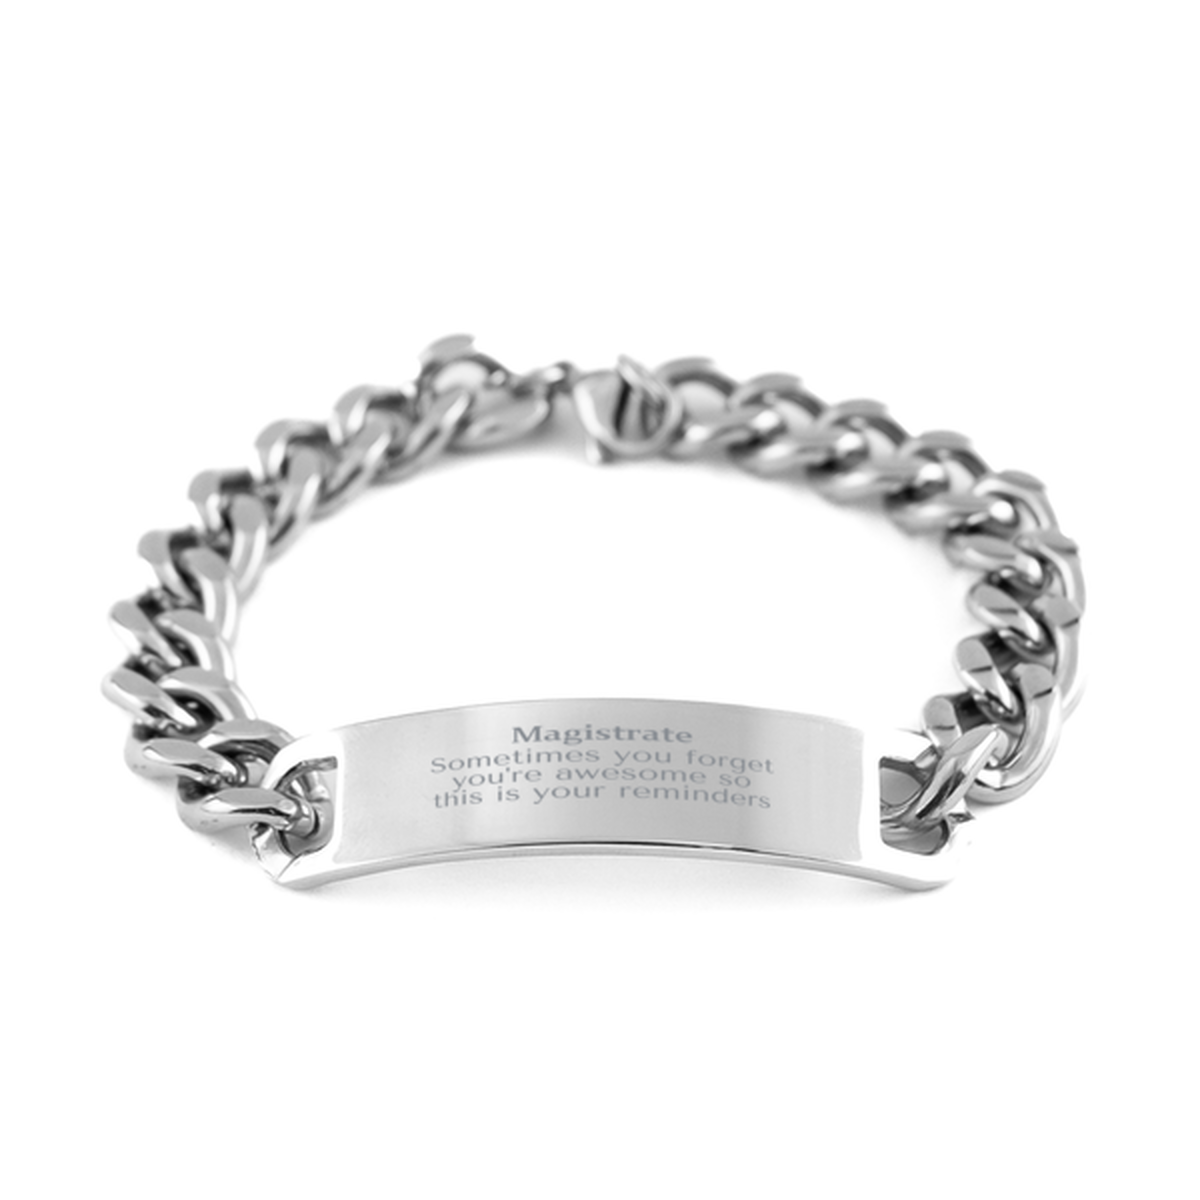 Sentimental Magistrate Cuban Chain Stainless Steel Bracelet, Magistrate Sometimes you forget you're awesome so this is your reminders, Graduation Christmas Birthday Gifts for Magistrate, Men, Women, Coworkers